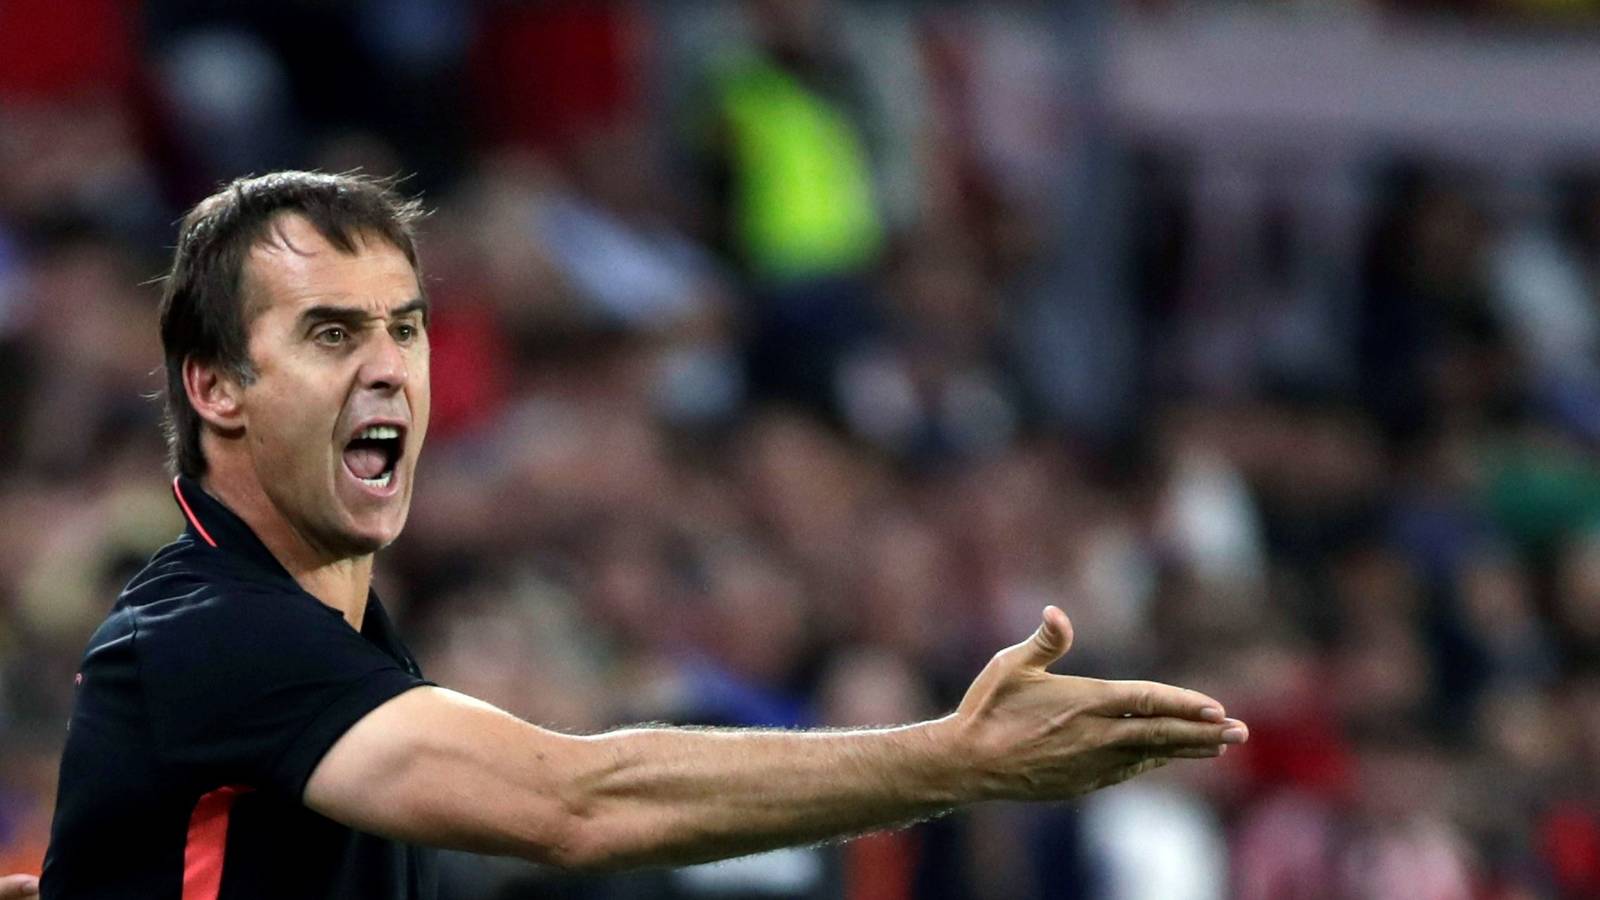 Julen Lopetegui on Atletico Madrid: “Once they get ahead it’s very complex”